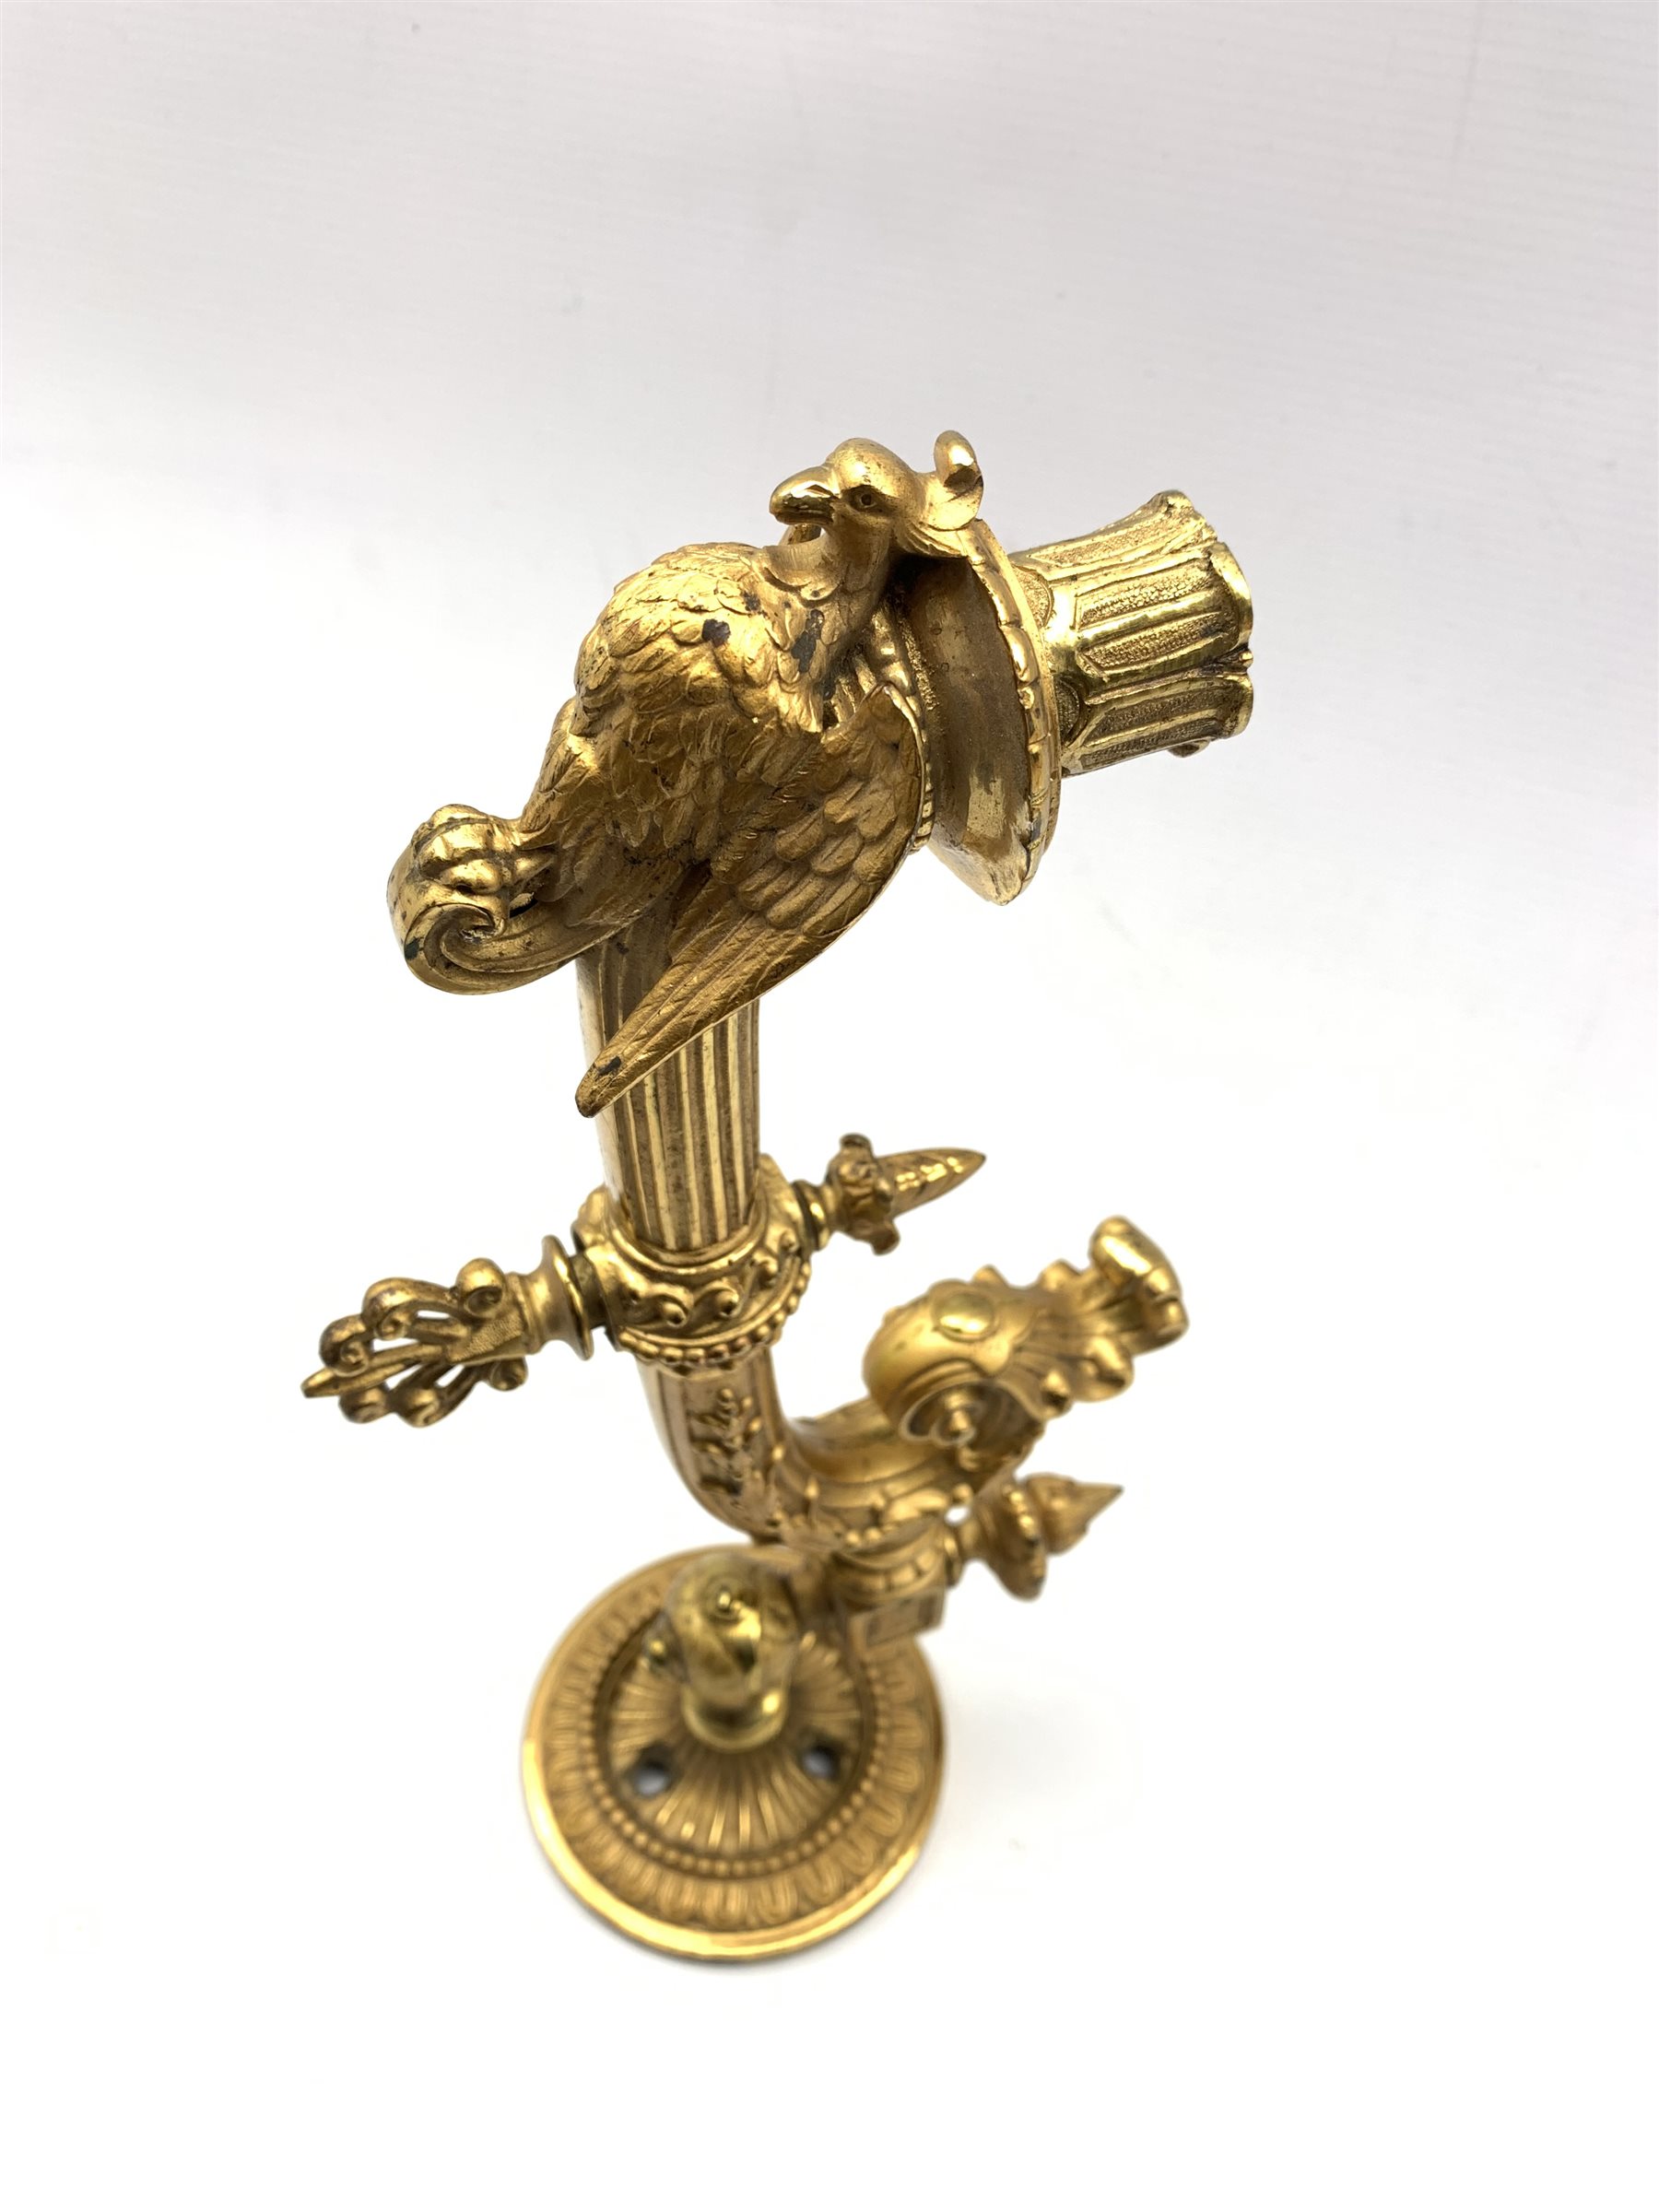 19th century gilt metal gas wall sconce with swivel plate, eagle, shell and scroll decoration L32cm, - Image 3 of 5